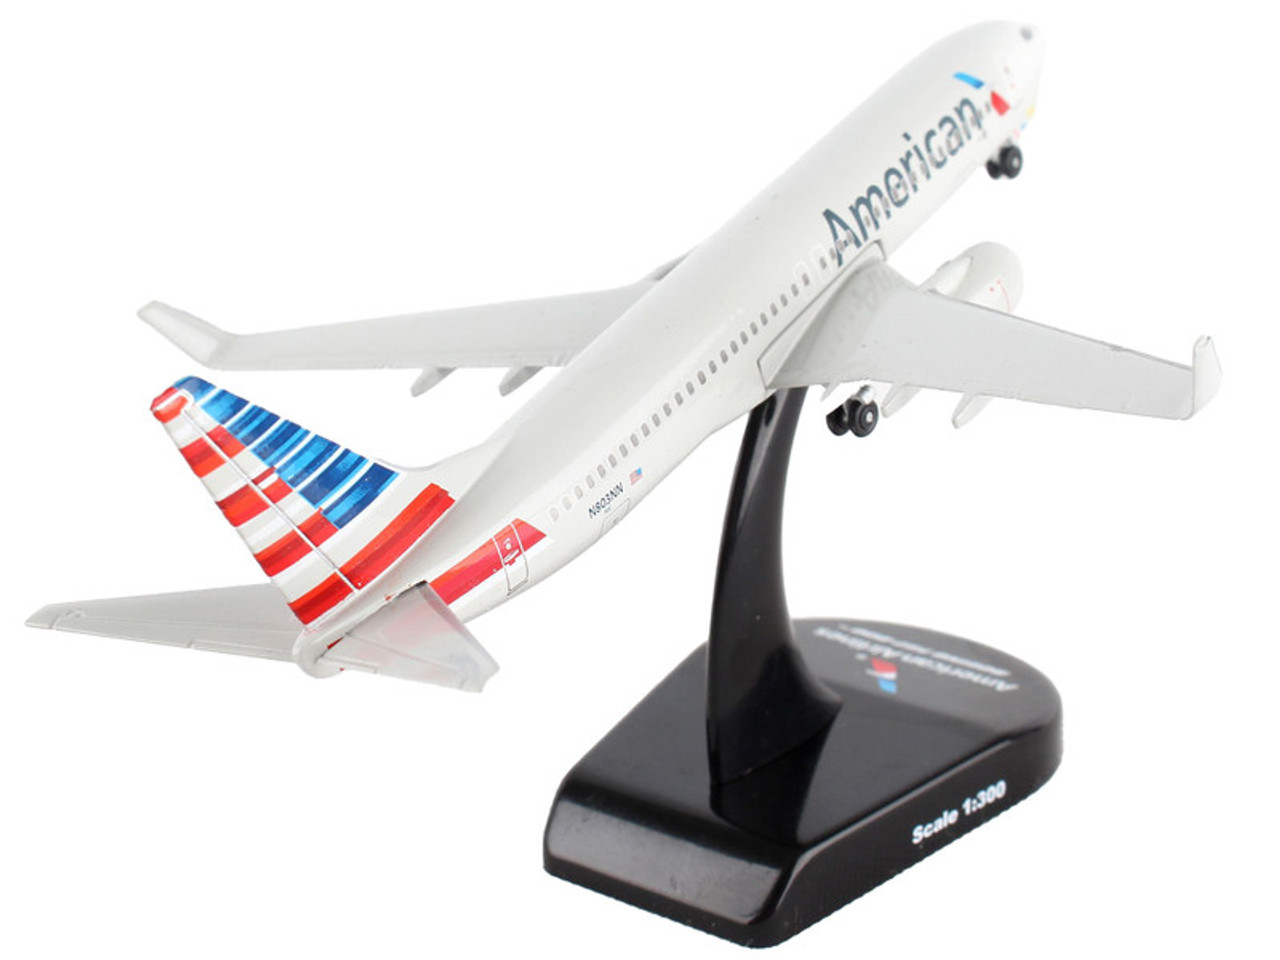 Boeing 737 Next Generation Commercial Aircraft "American Airlines" 1/300 Diecast Model Airplane by Postage Stamp